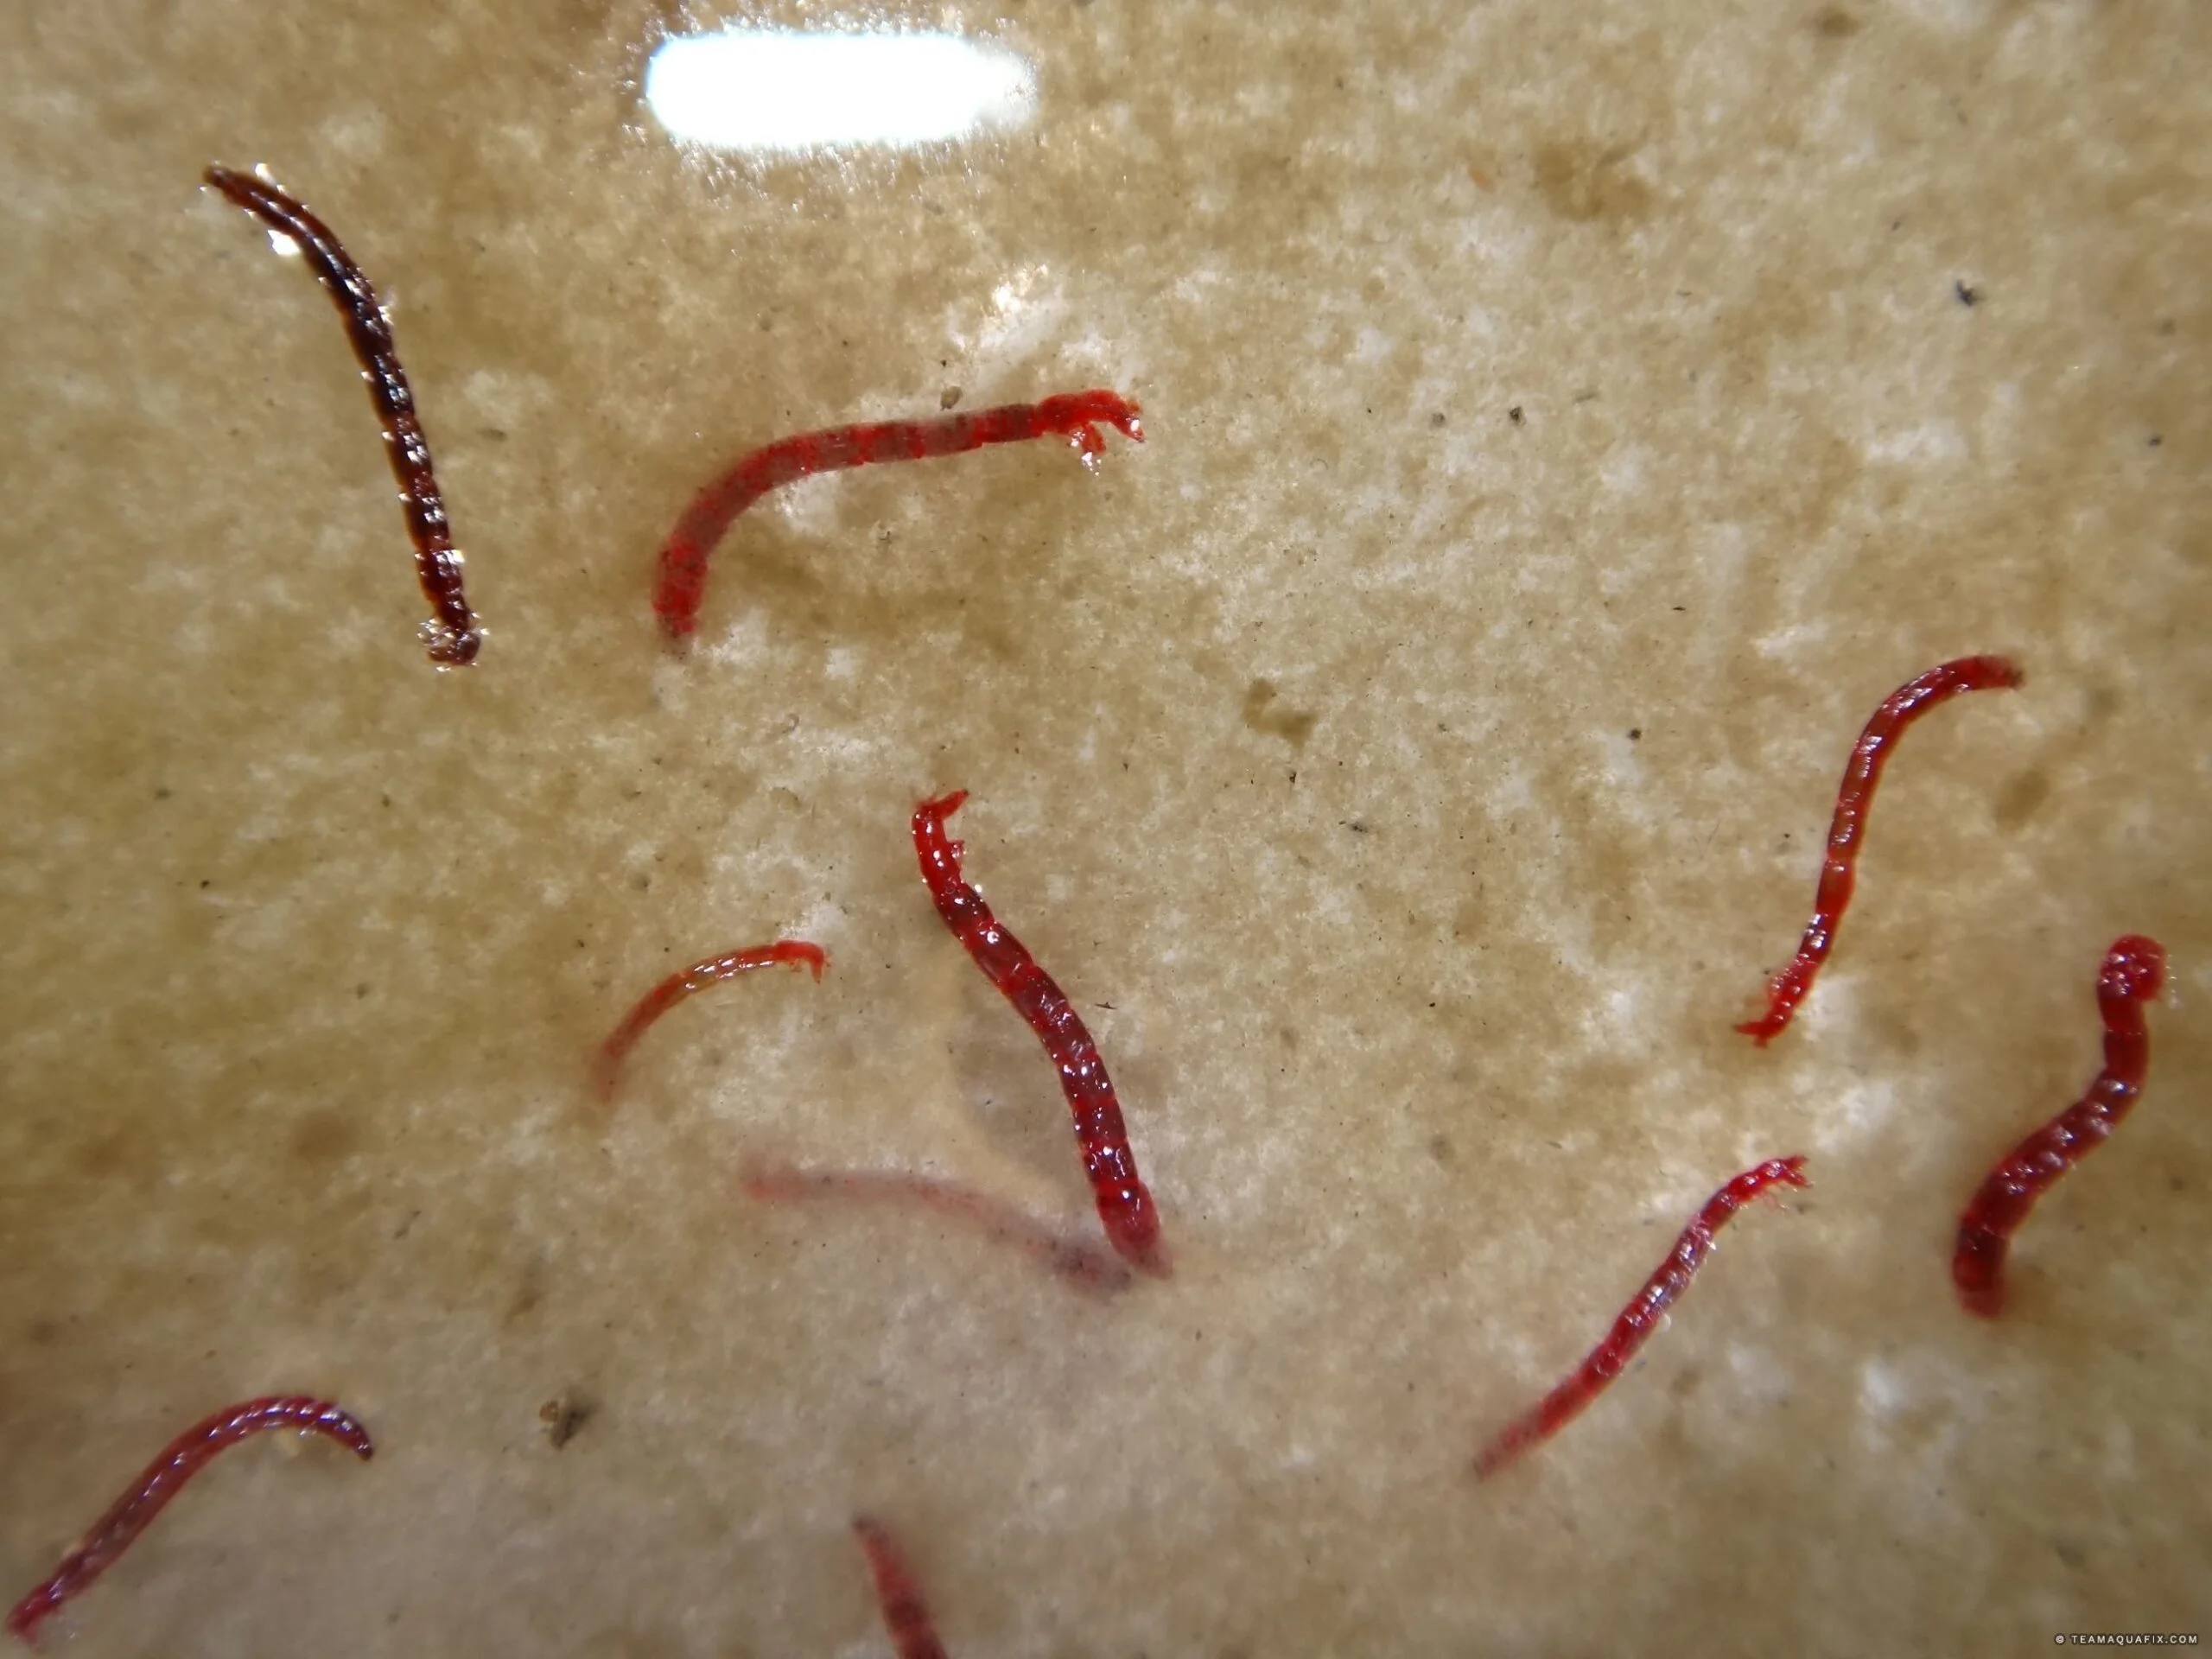 https://aquariumia.com/how-to-get-rid-of-red-worms-in-water-tank/